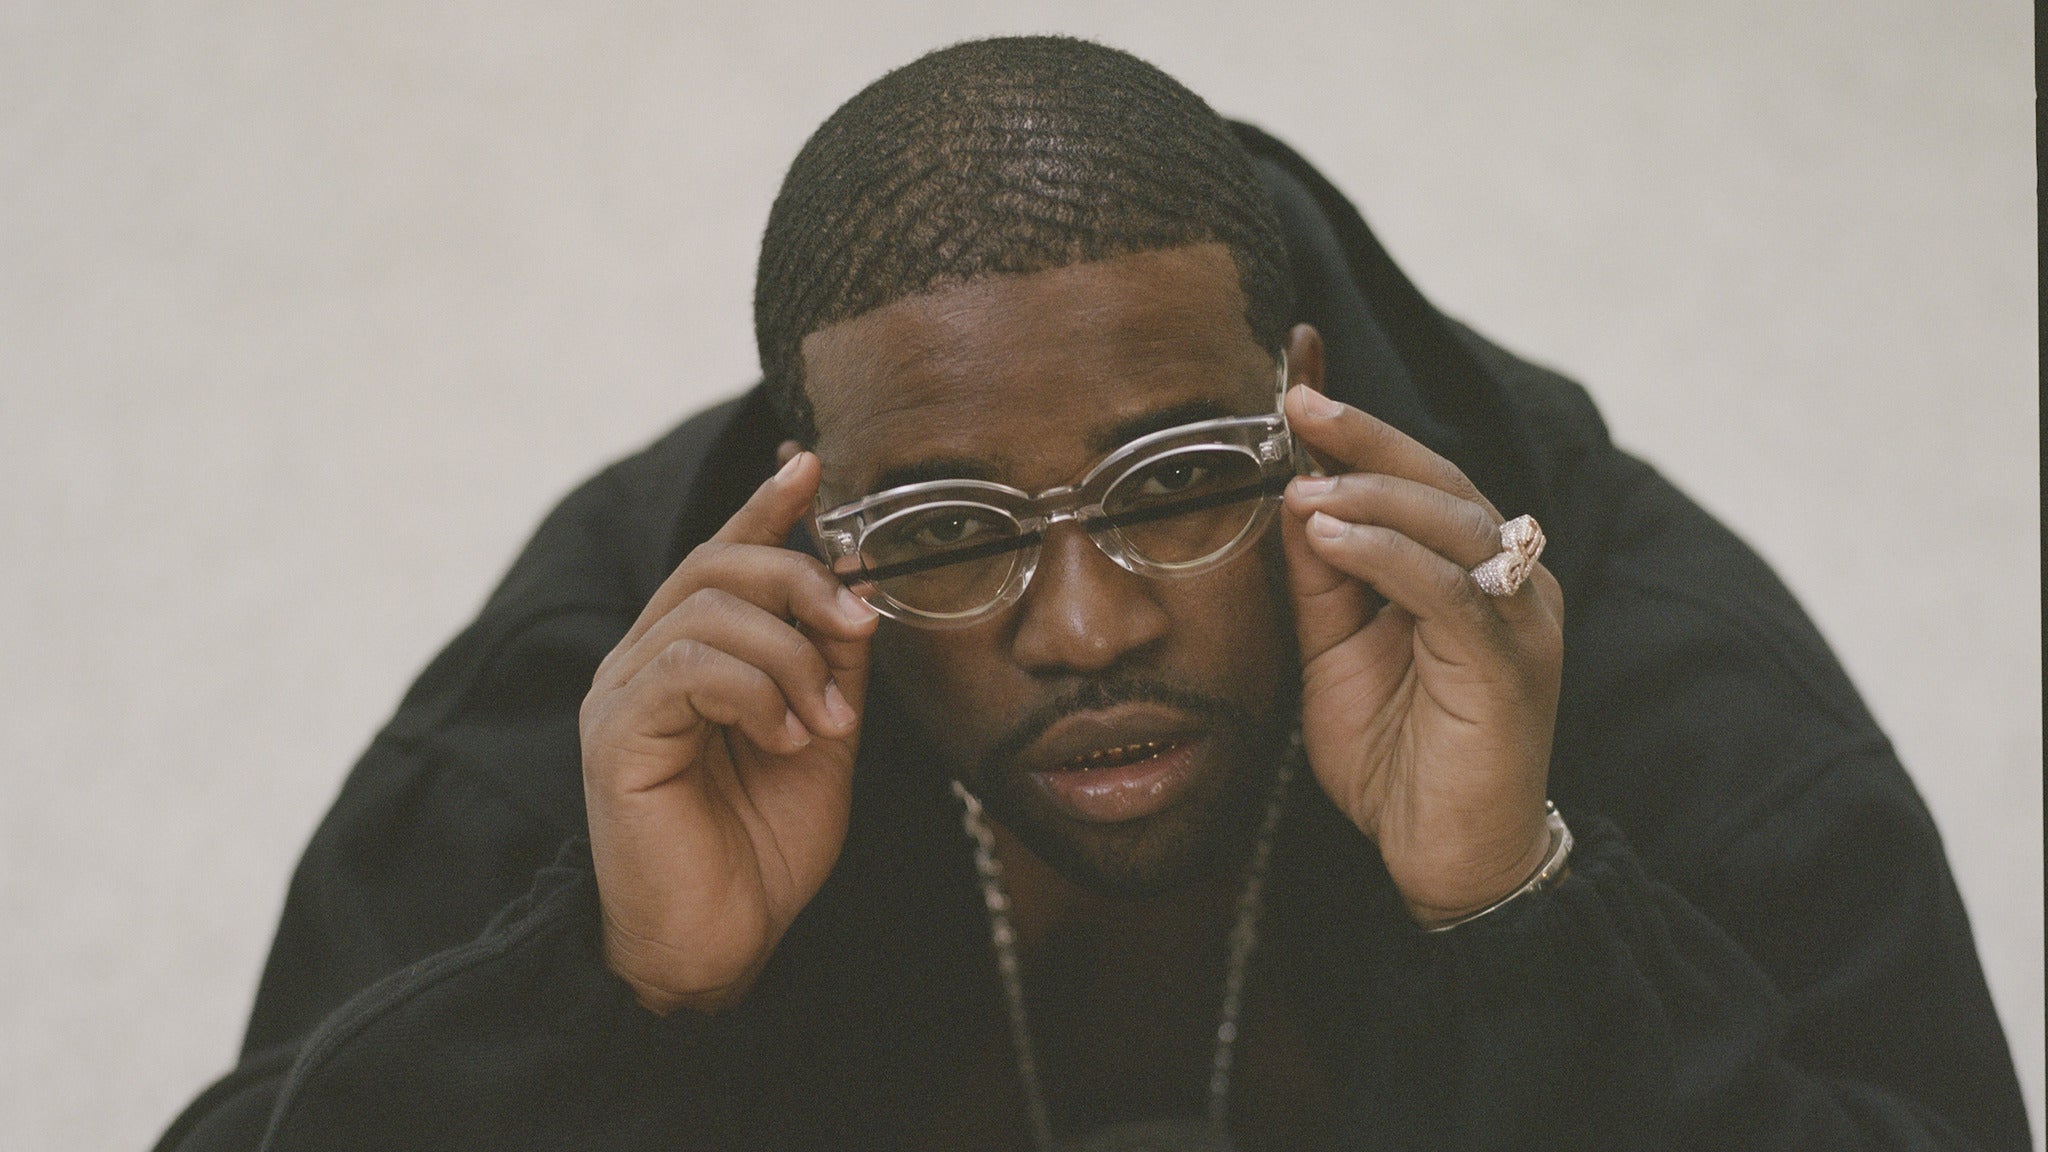 FERG presents Mad Man Tour in San Diego promo photo for VIP Package Onsale presale offer code